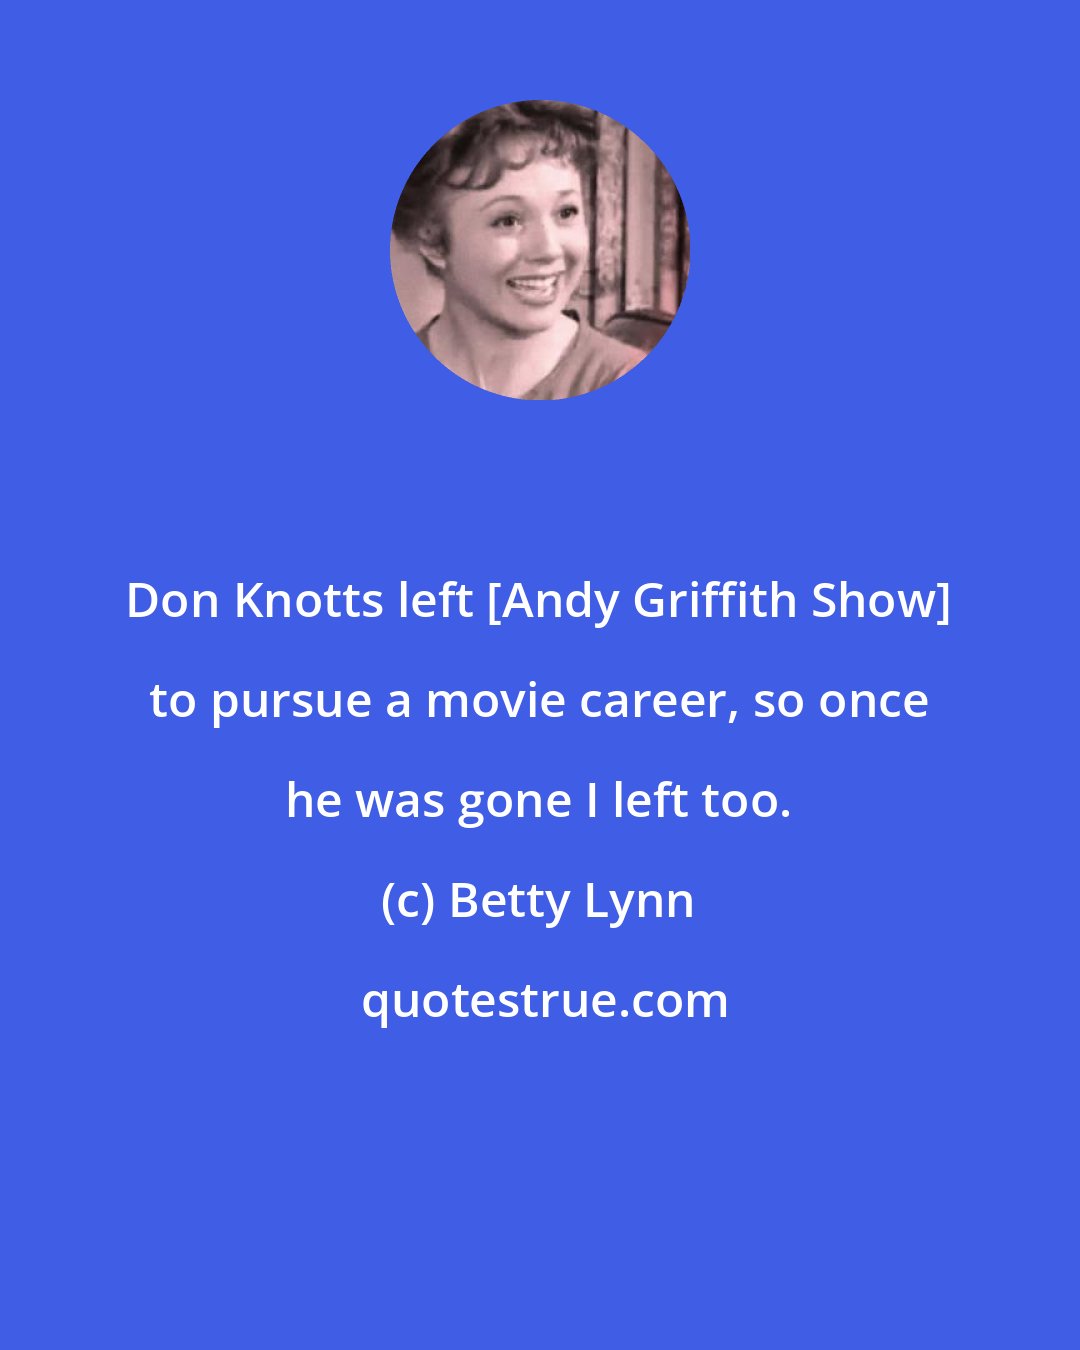 Betty Lynn: Don Knotts left [Andy Griffith Show] to pursue a movie career, so once he was gone I left too.